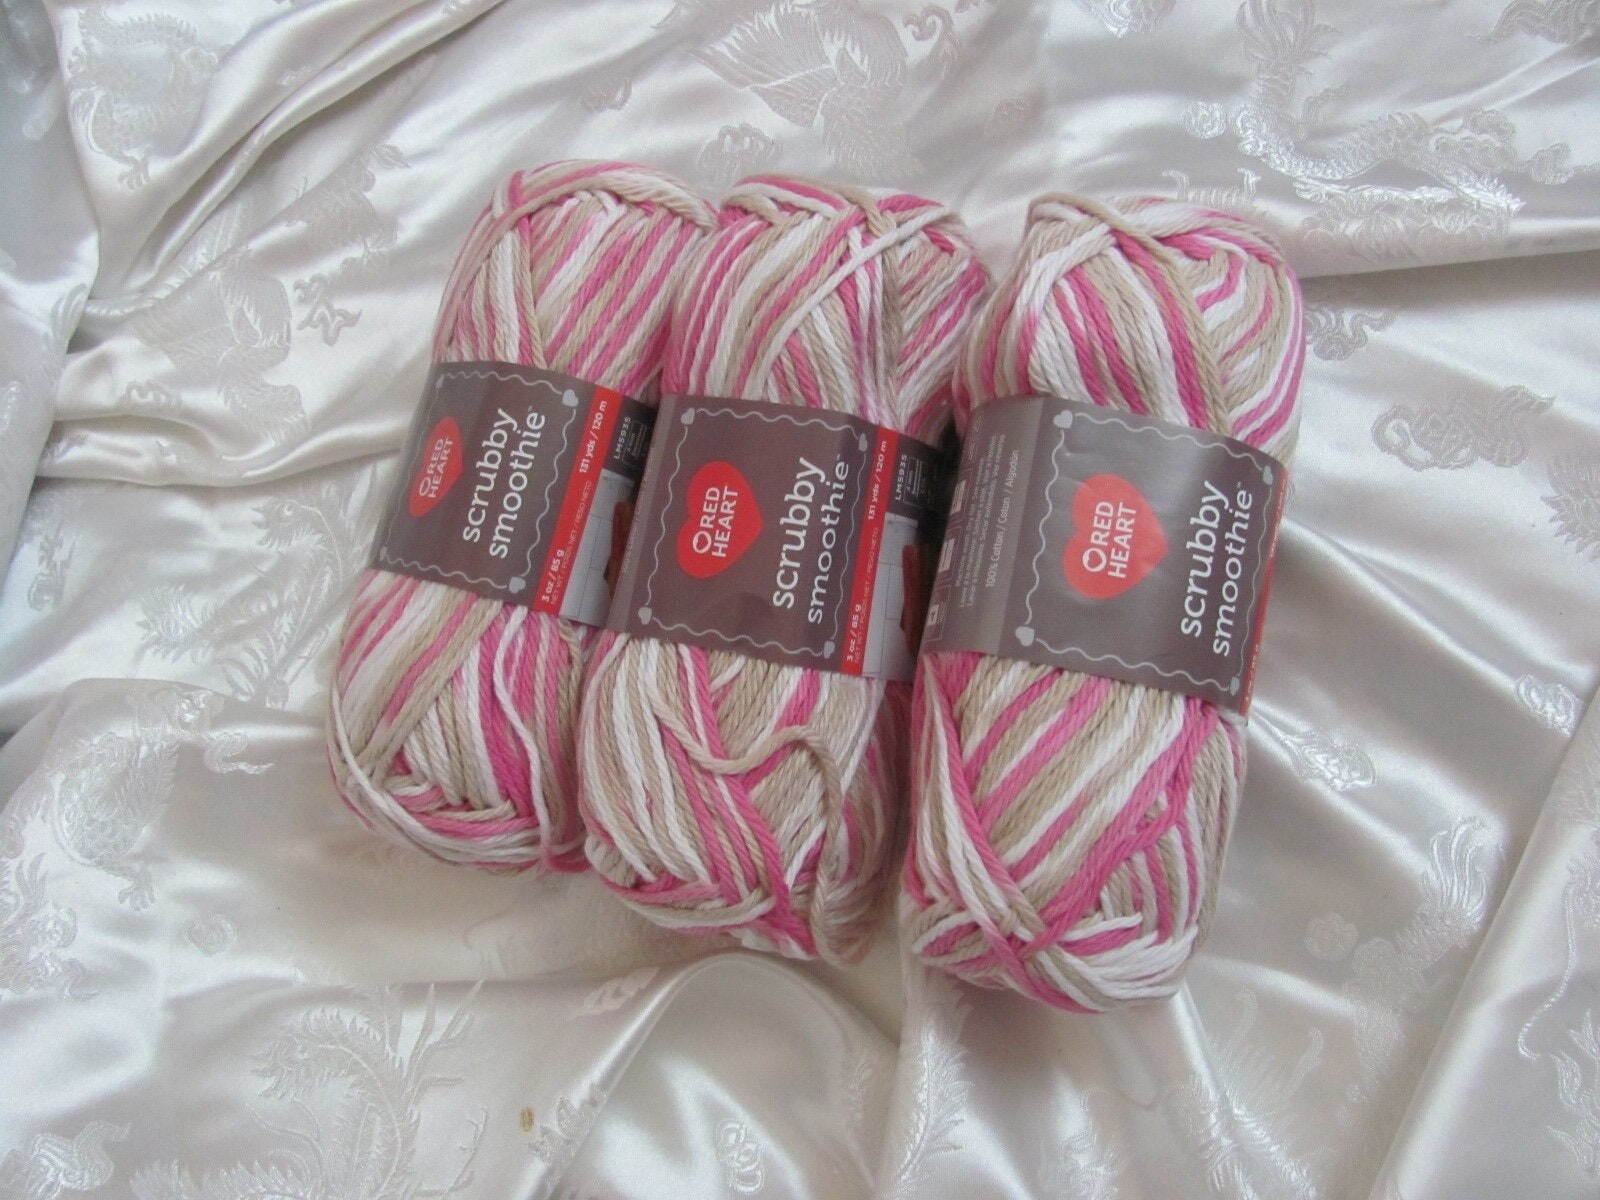 Red Heart 100% Cotton 4 Ply Knit and Crochet Yarn 2 1/2 Oz New Coats &  Clark ART.E.283 Sold by the Skein 